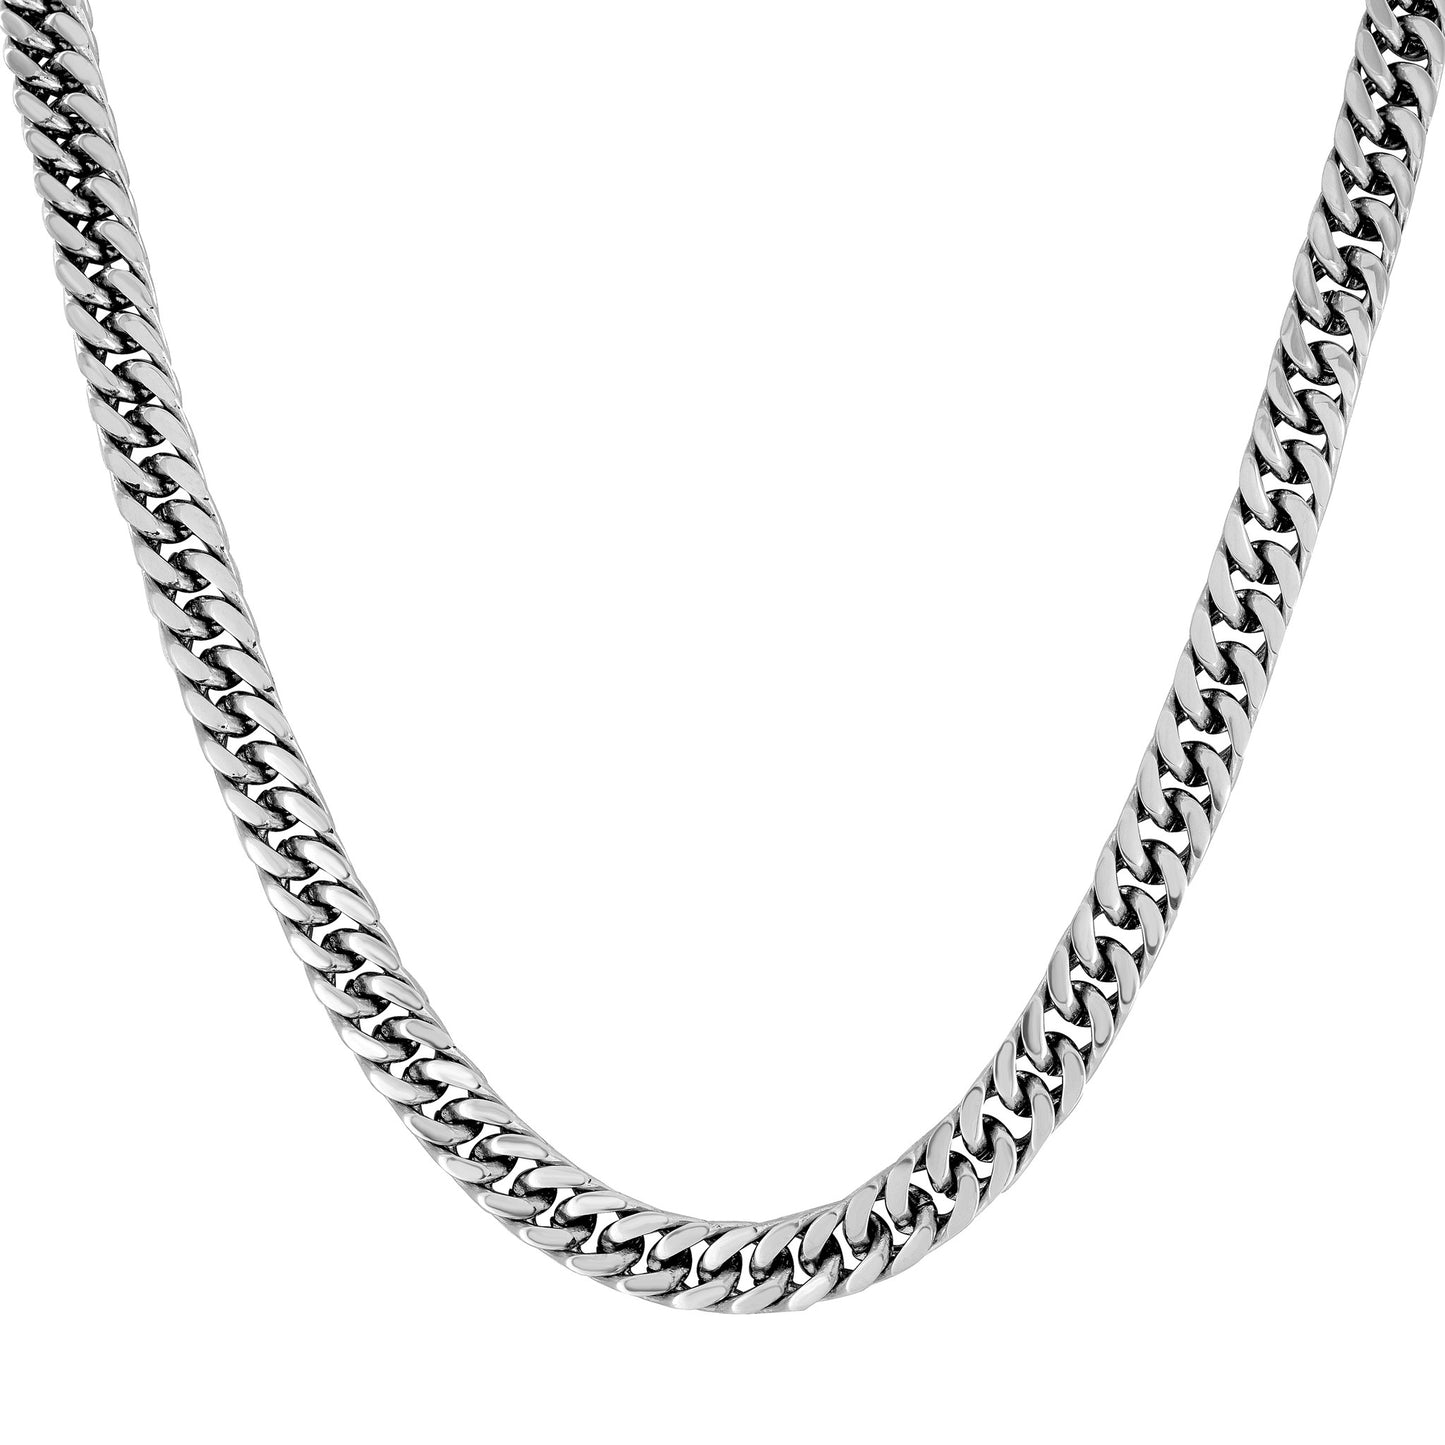 Miami Cuban Necklace Stainless Steel White Gold Finish Thin 5 MM 30" Chain New